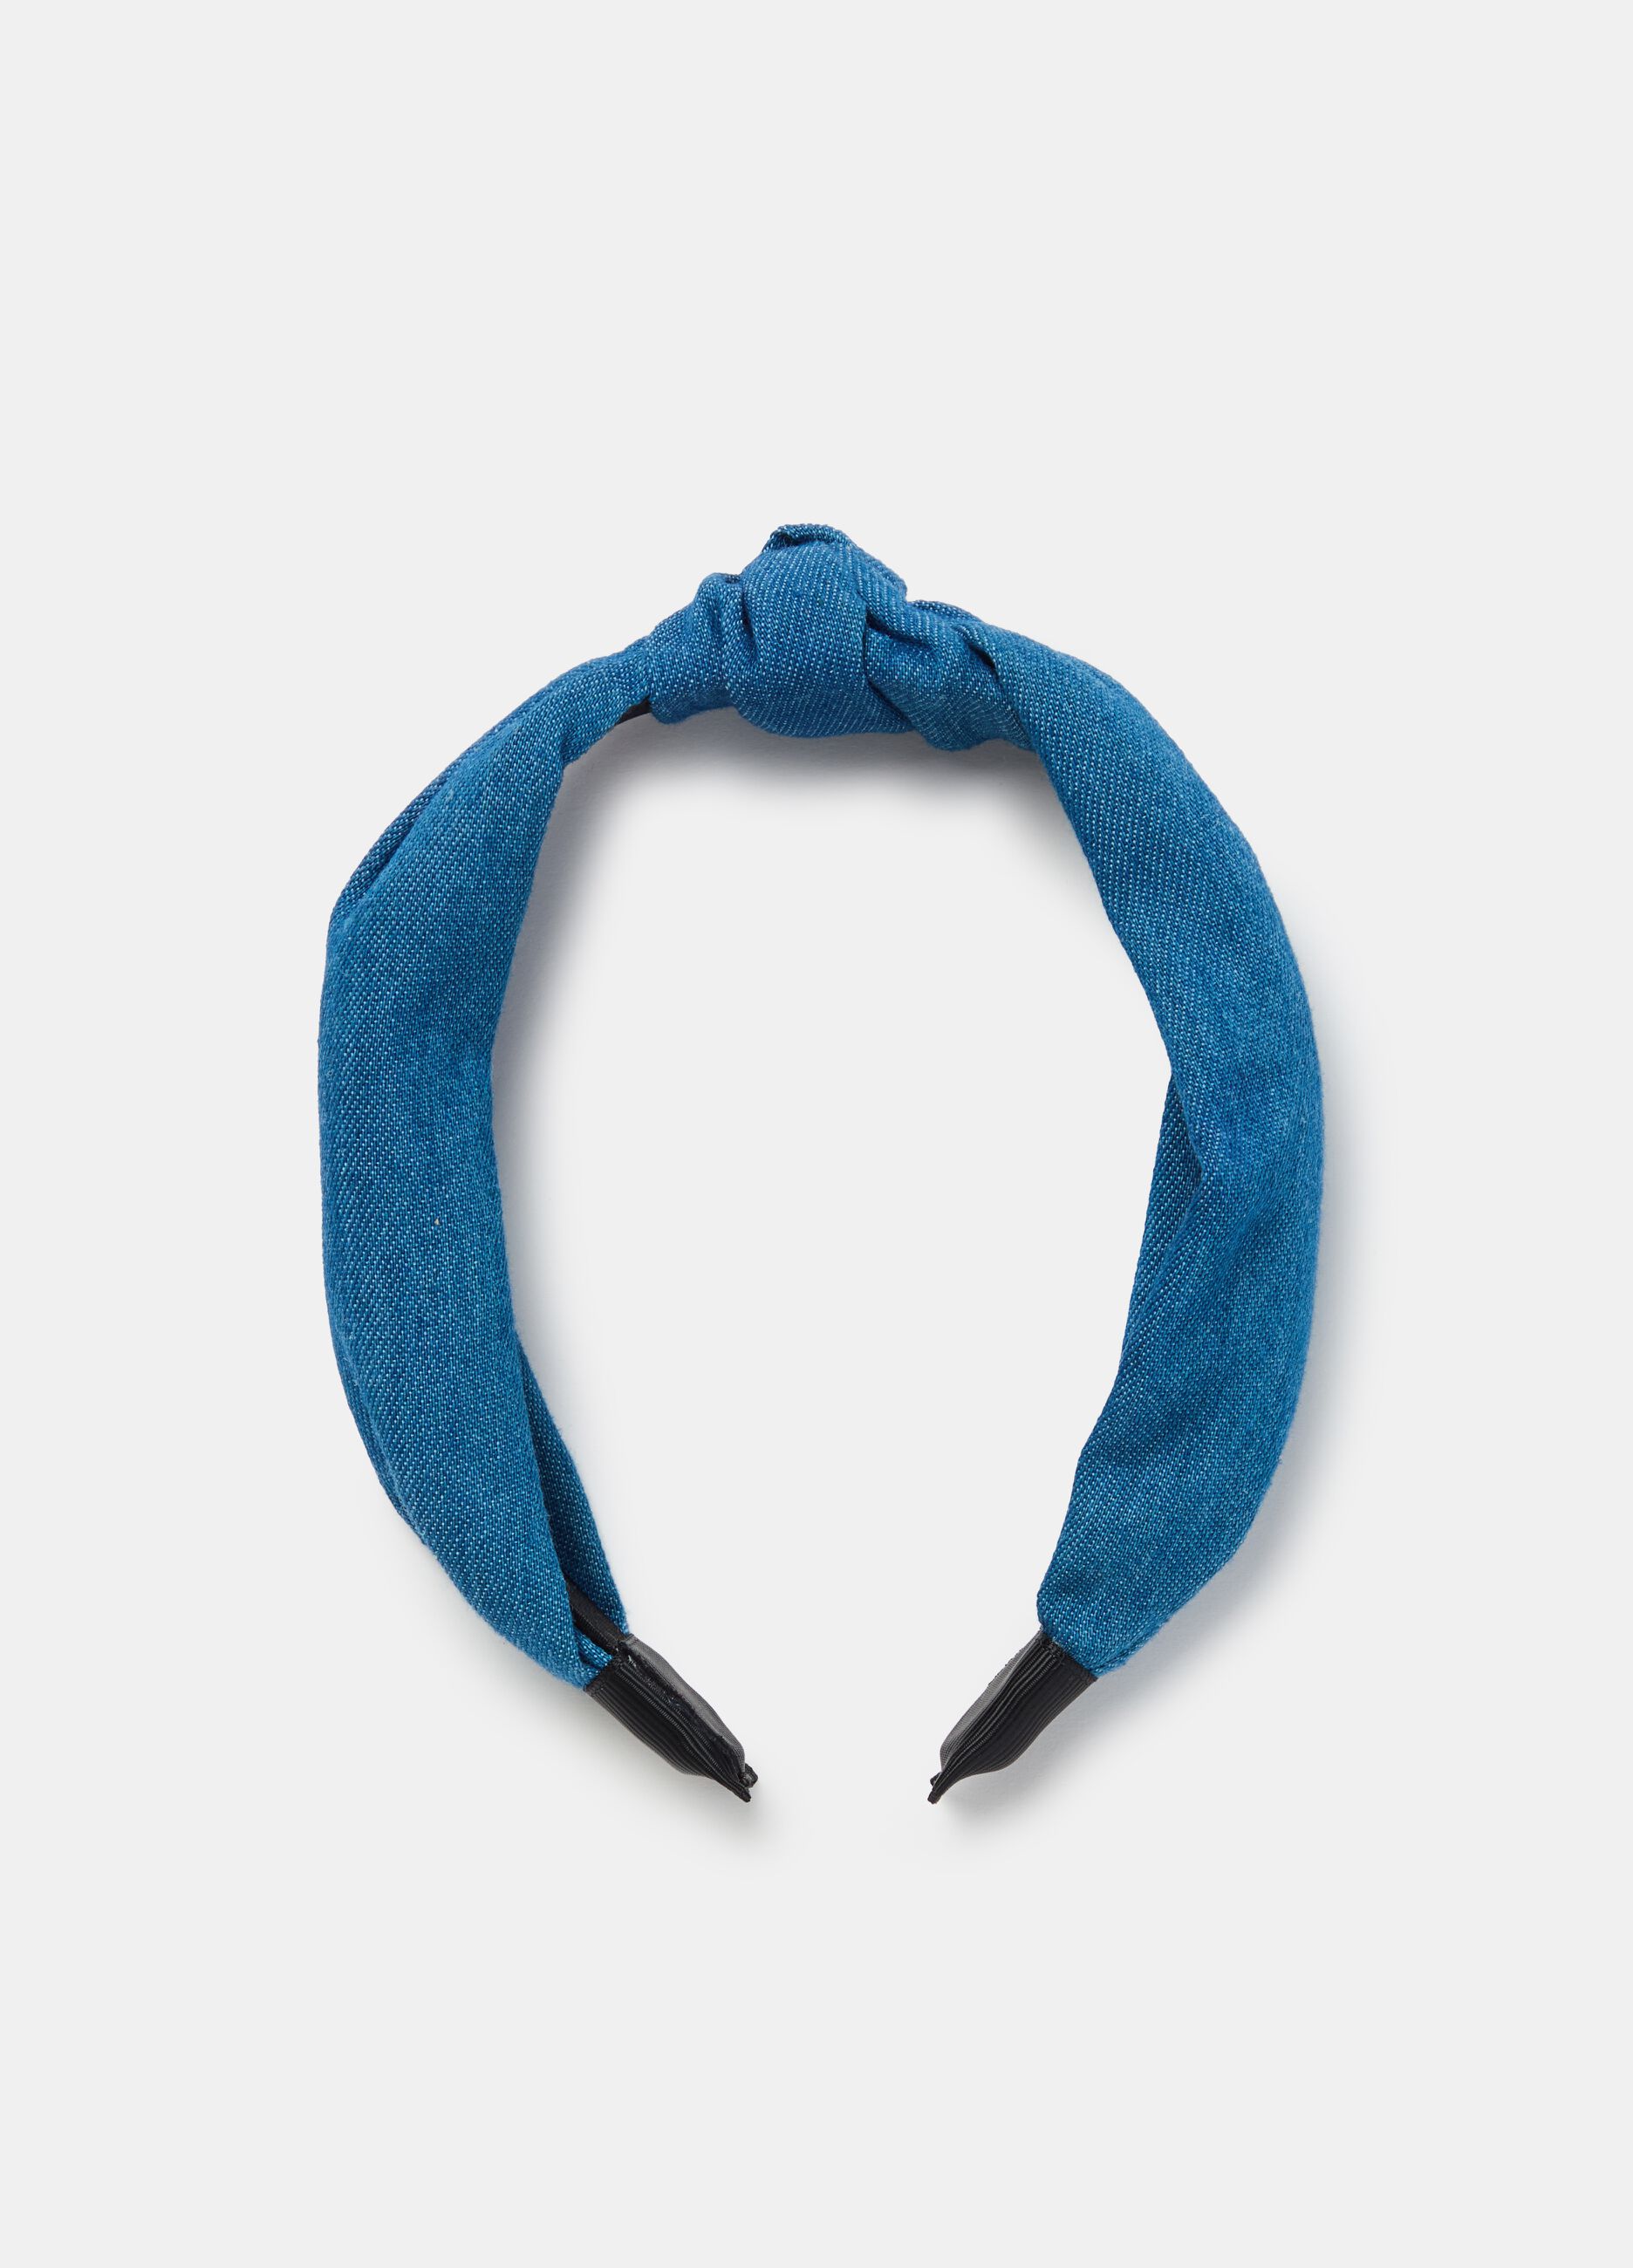 Alice band in denim with knot